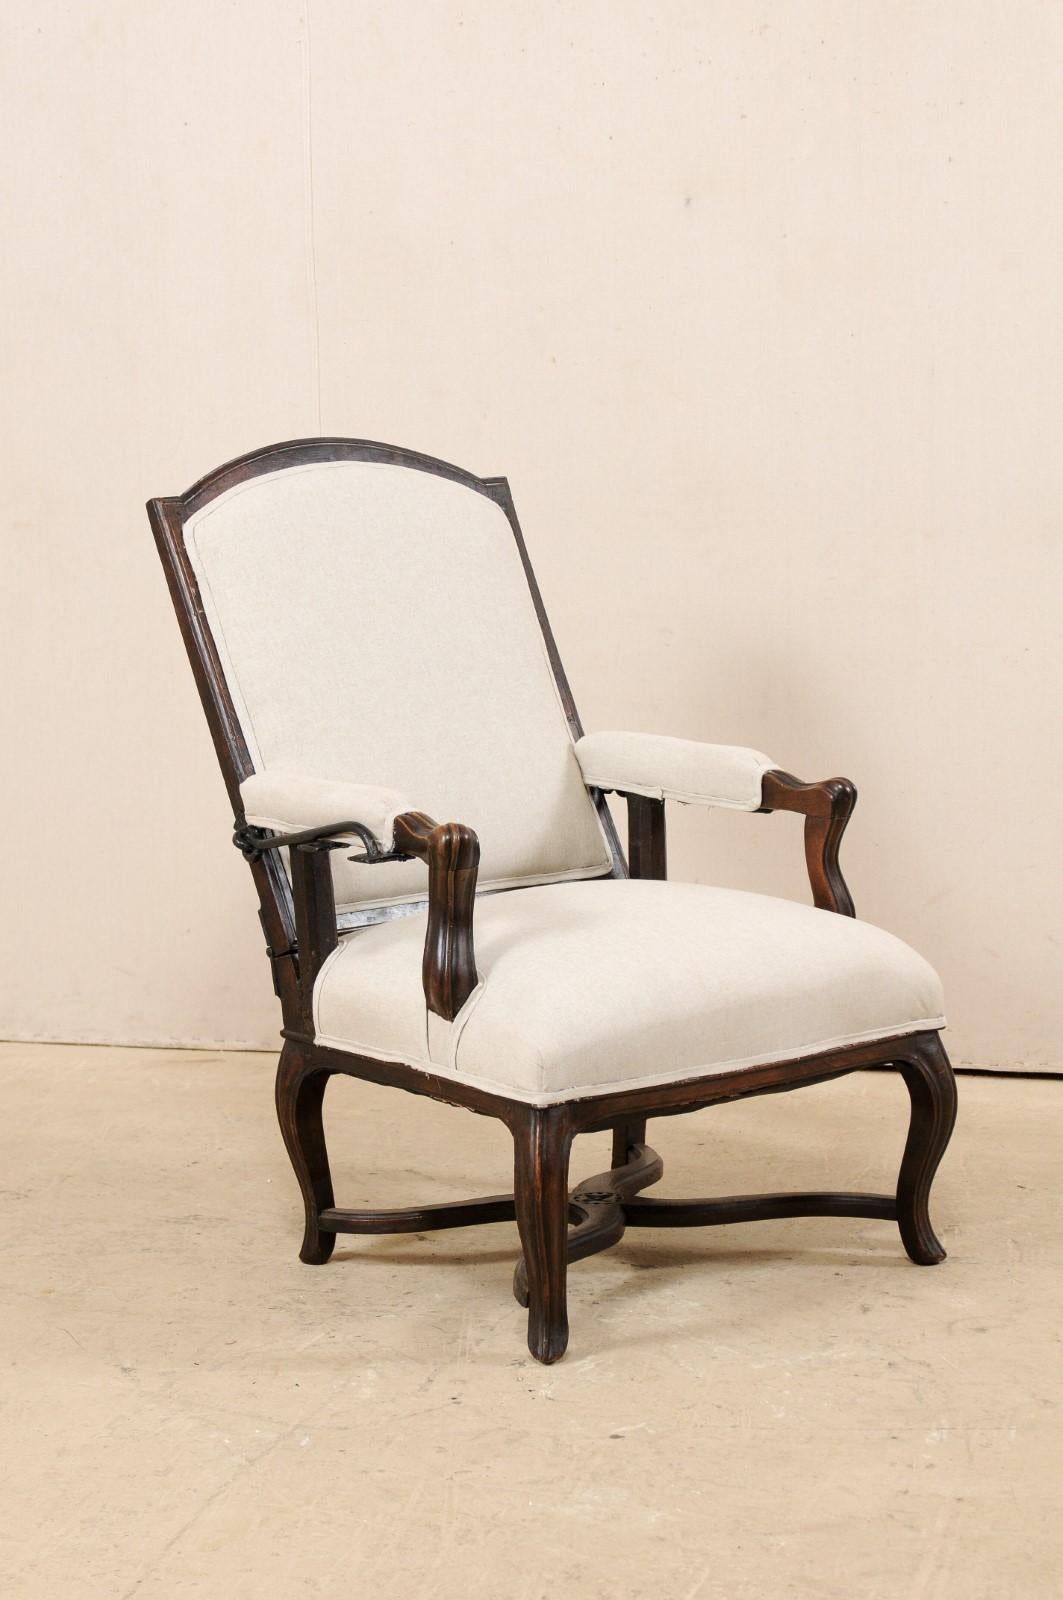 An Italian reclining wood and upholstered chair from the early 19th century. This antique chair from Italy has a rectangular-shaped back with wood arched top rail, nicely carved knuckles, manchette arm rests, and are raised upon sweetly curved legs